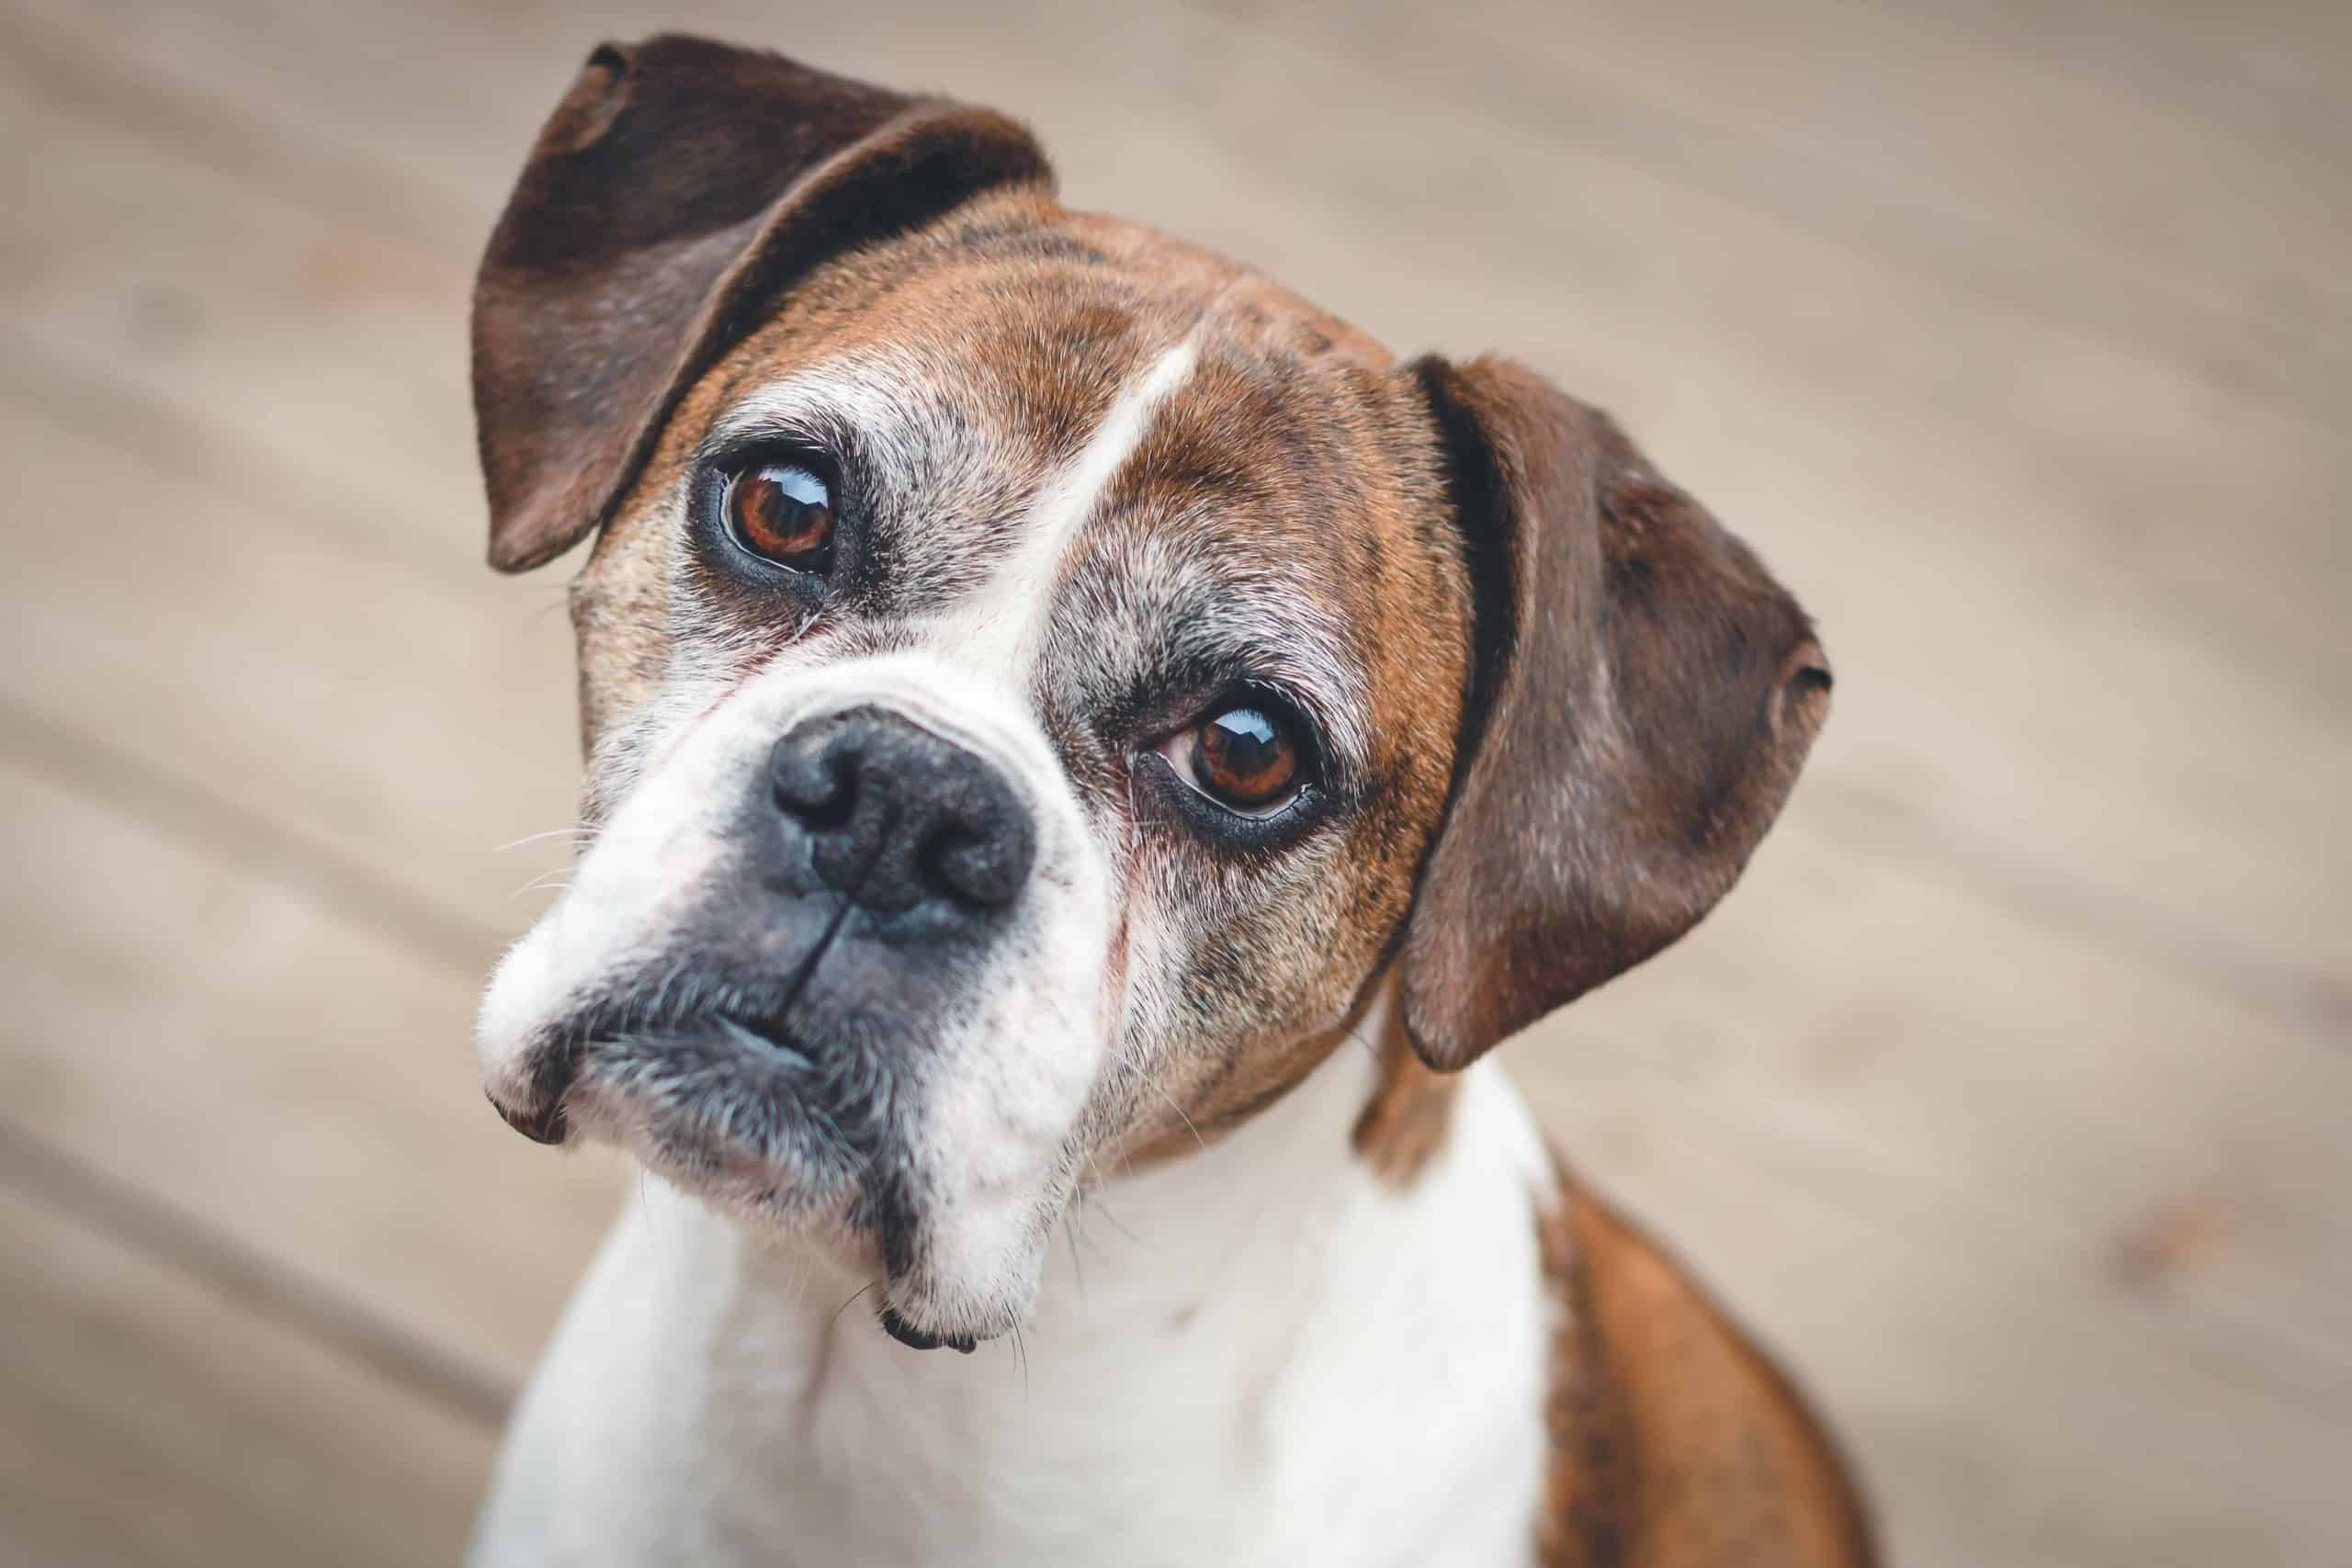 Old boxer with white face. Canine Cognitive Dysfunction is a severe dog disease, but if you observe the signs of dementia in dogs early, you can take steps to slow down your dog's mental decline.